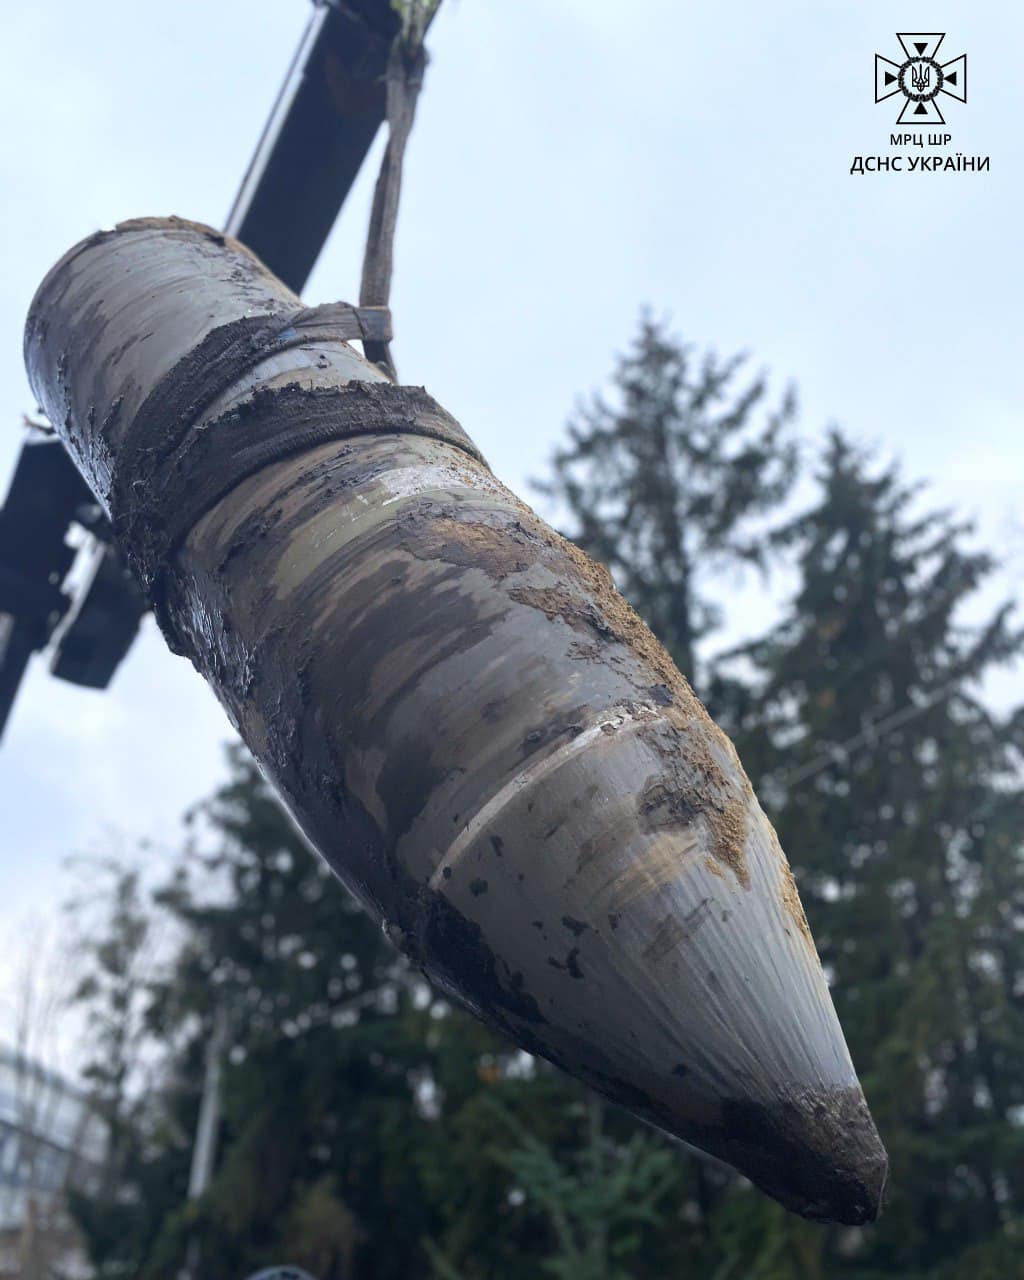 Unexploded warhead of a Kh-47M2 Kinzhal missile during its disposal by Ukrainian civil services